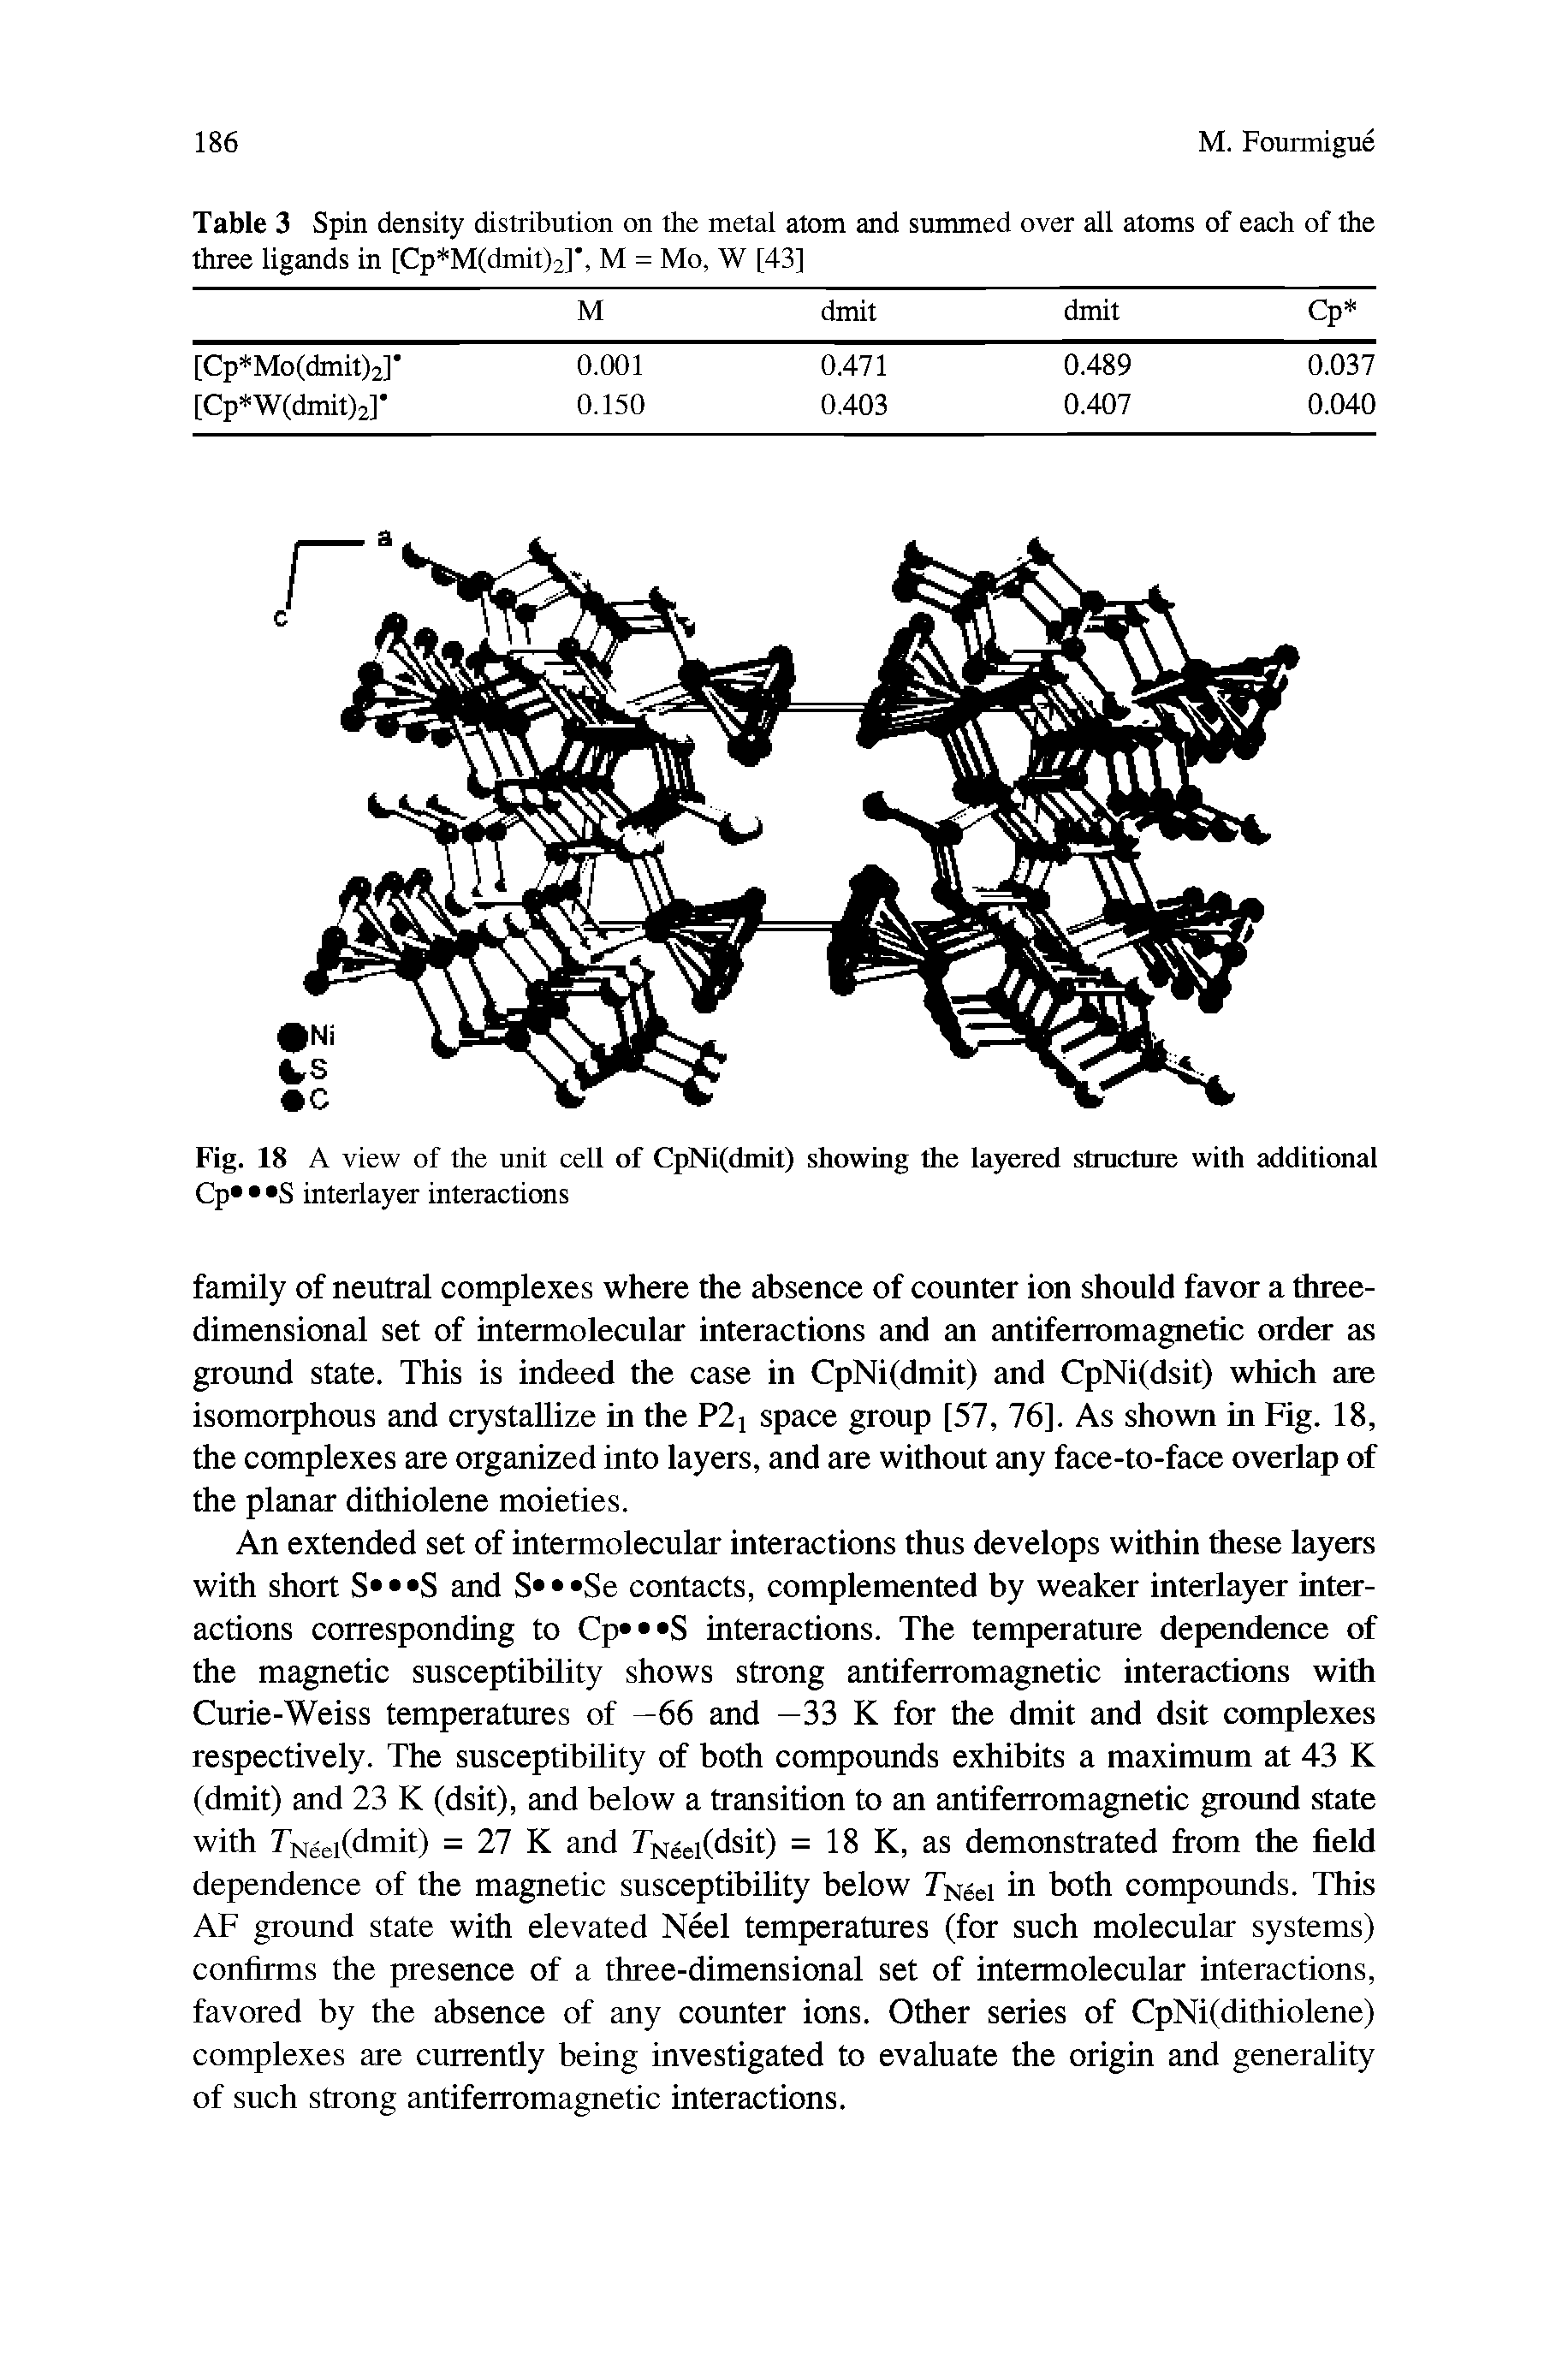 Table 3 Spin density distribution on the metal atom and summed over all atoms of each of the three ligands in [Cp M(dmit)2], M = Mo, W [43]...